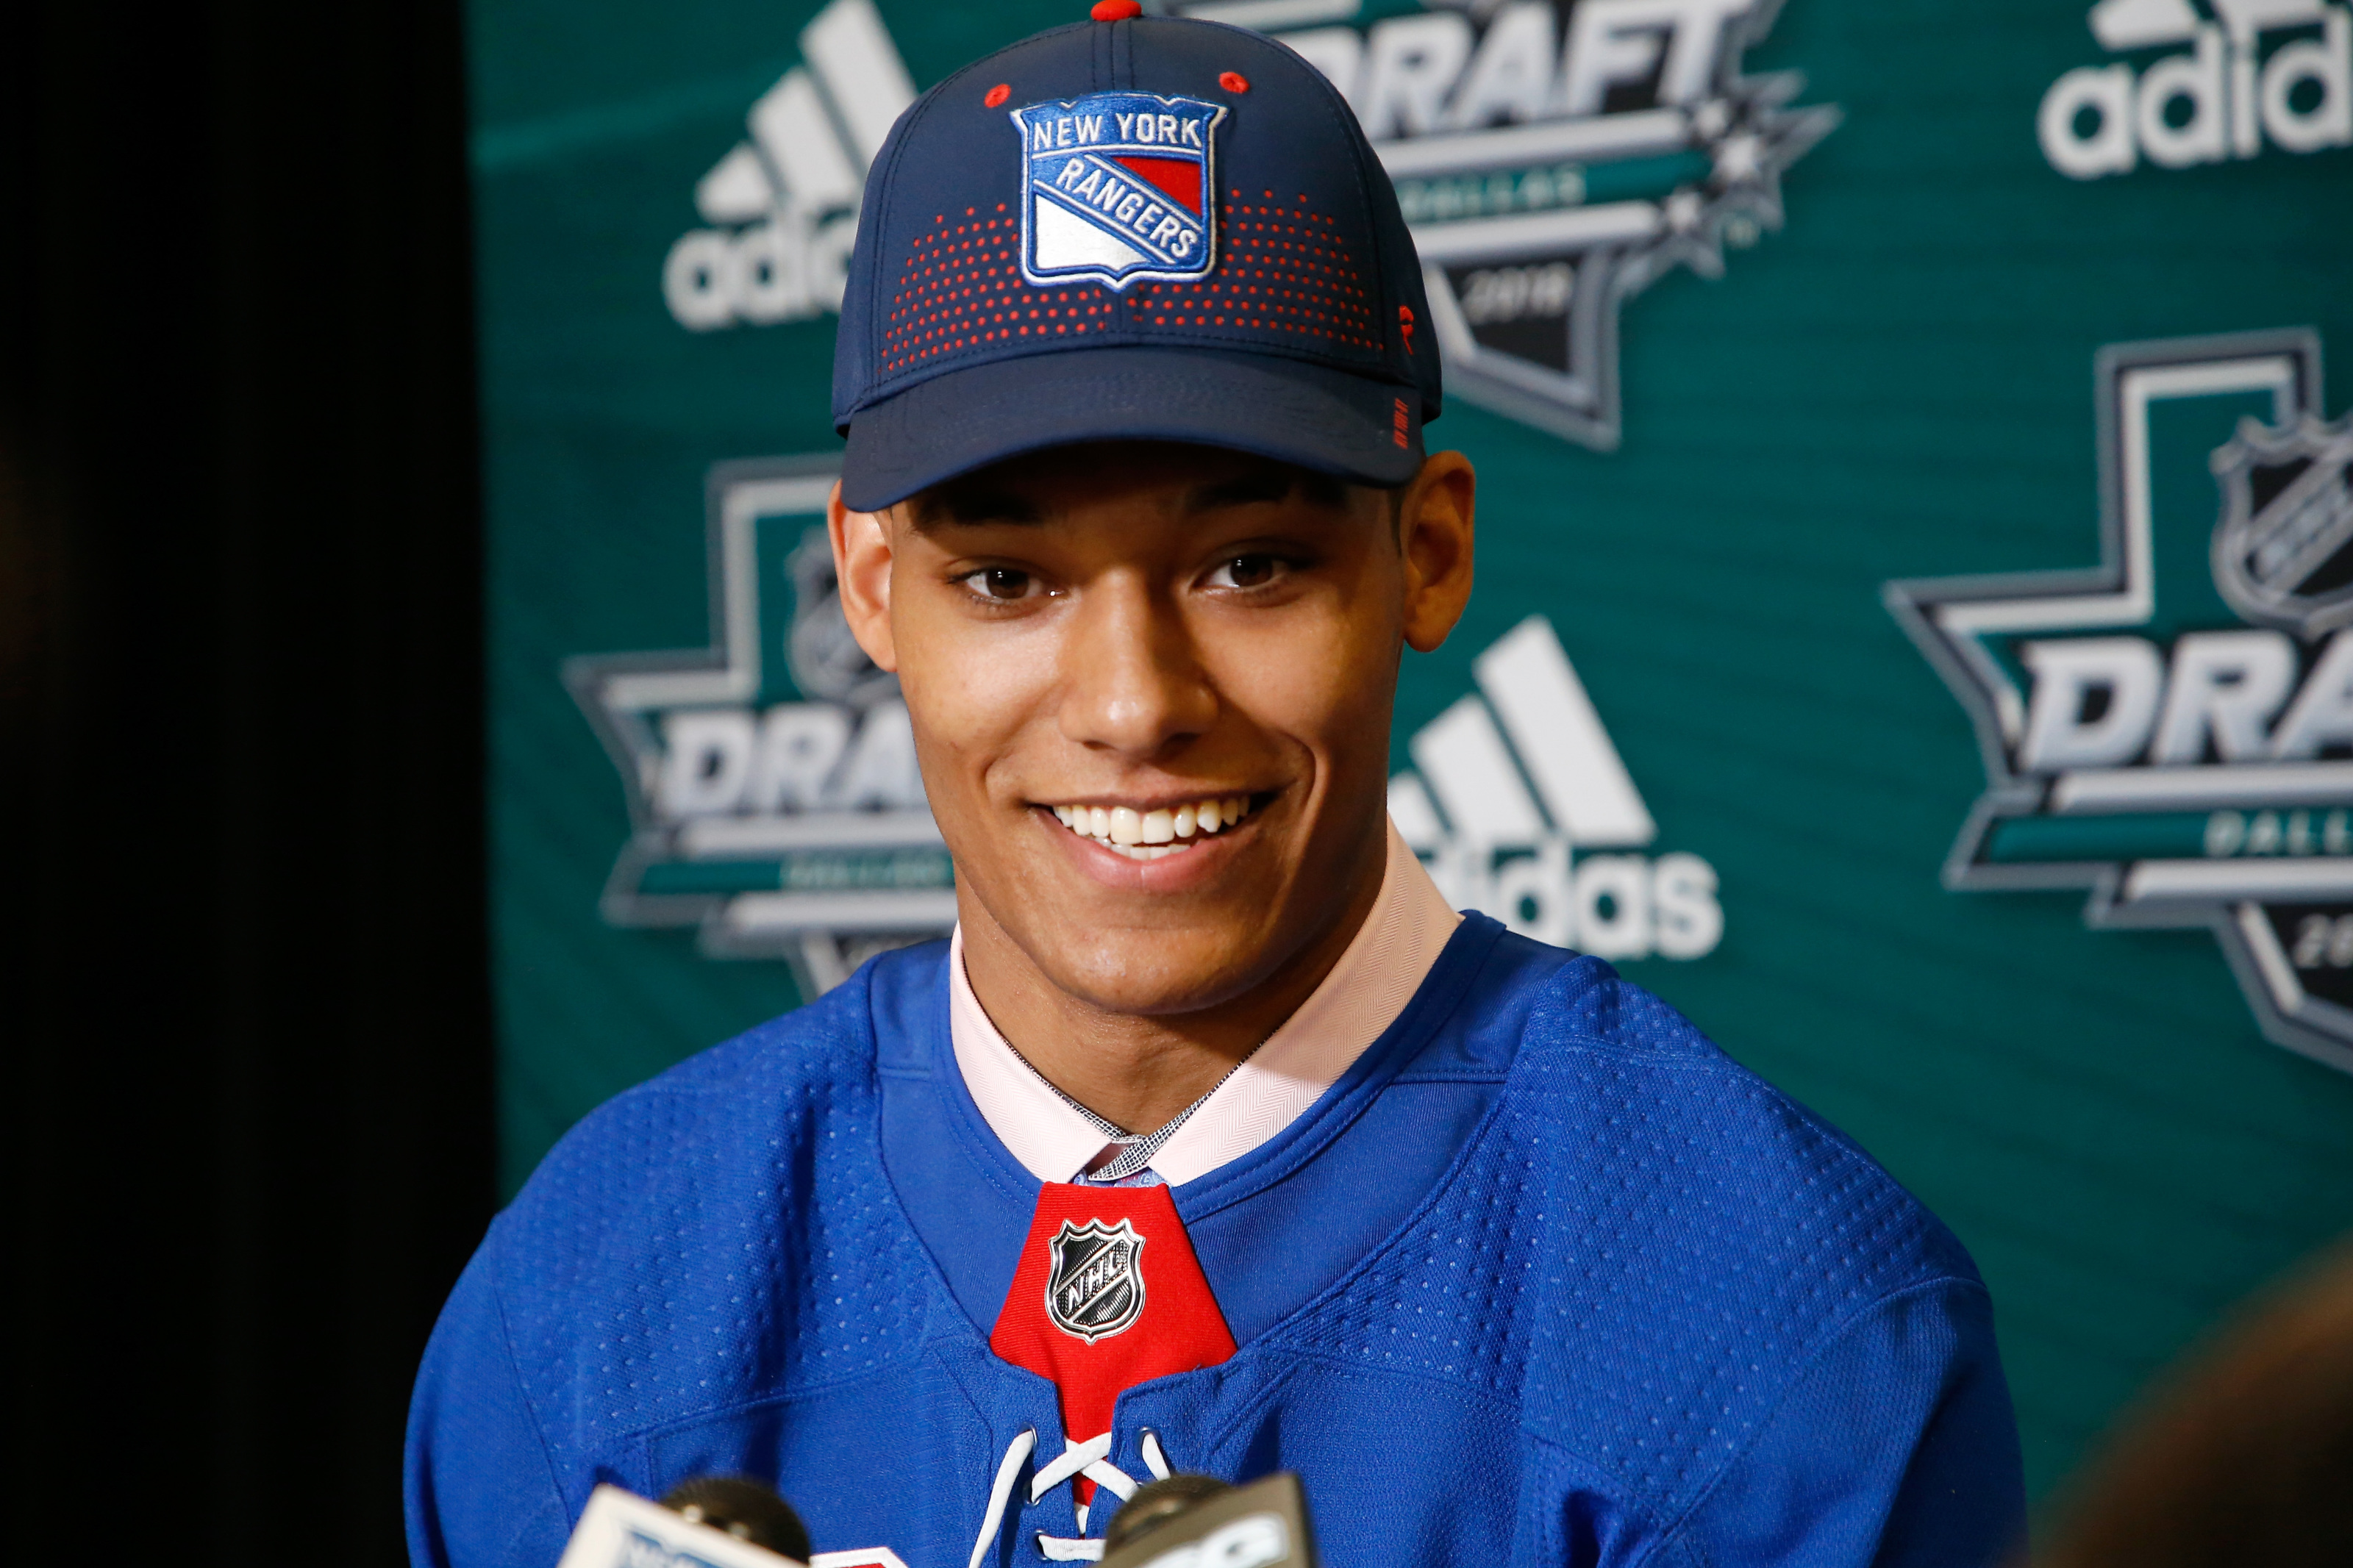 K'Andre Miller's unique path to becoming a top Rangers blue-line prospect -  ESPN